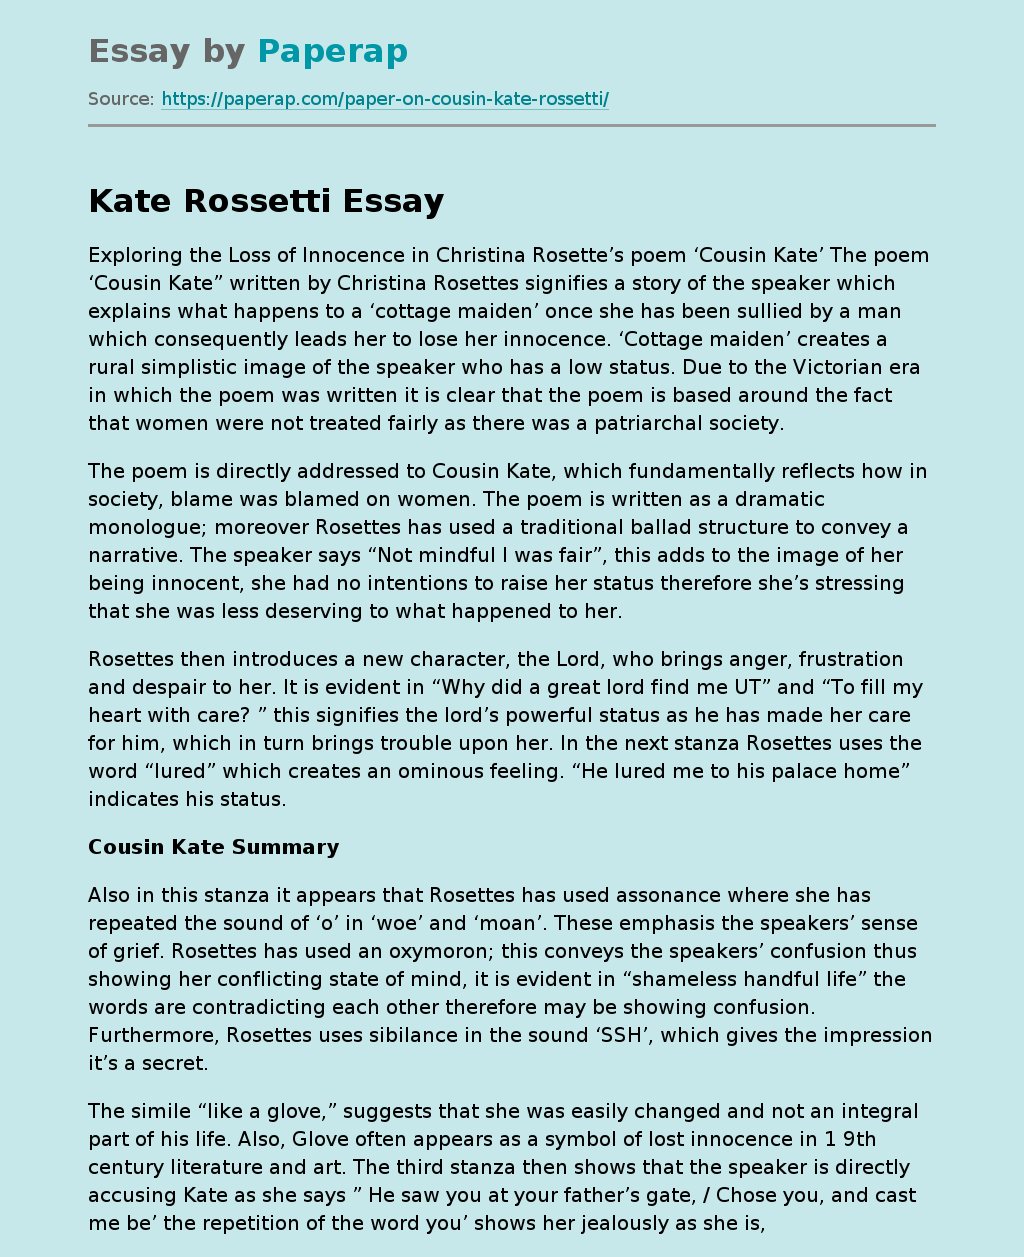 Exploration of the Loss of Innocence by Christina Rosette Cousin Kate